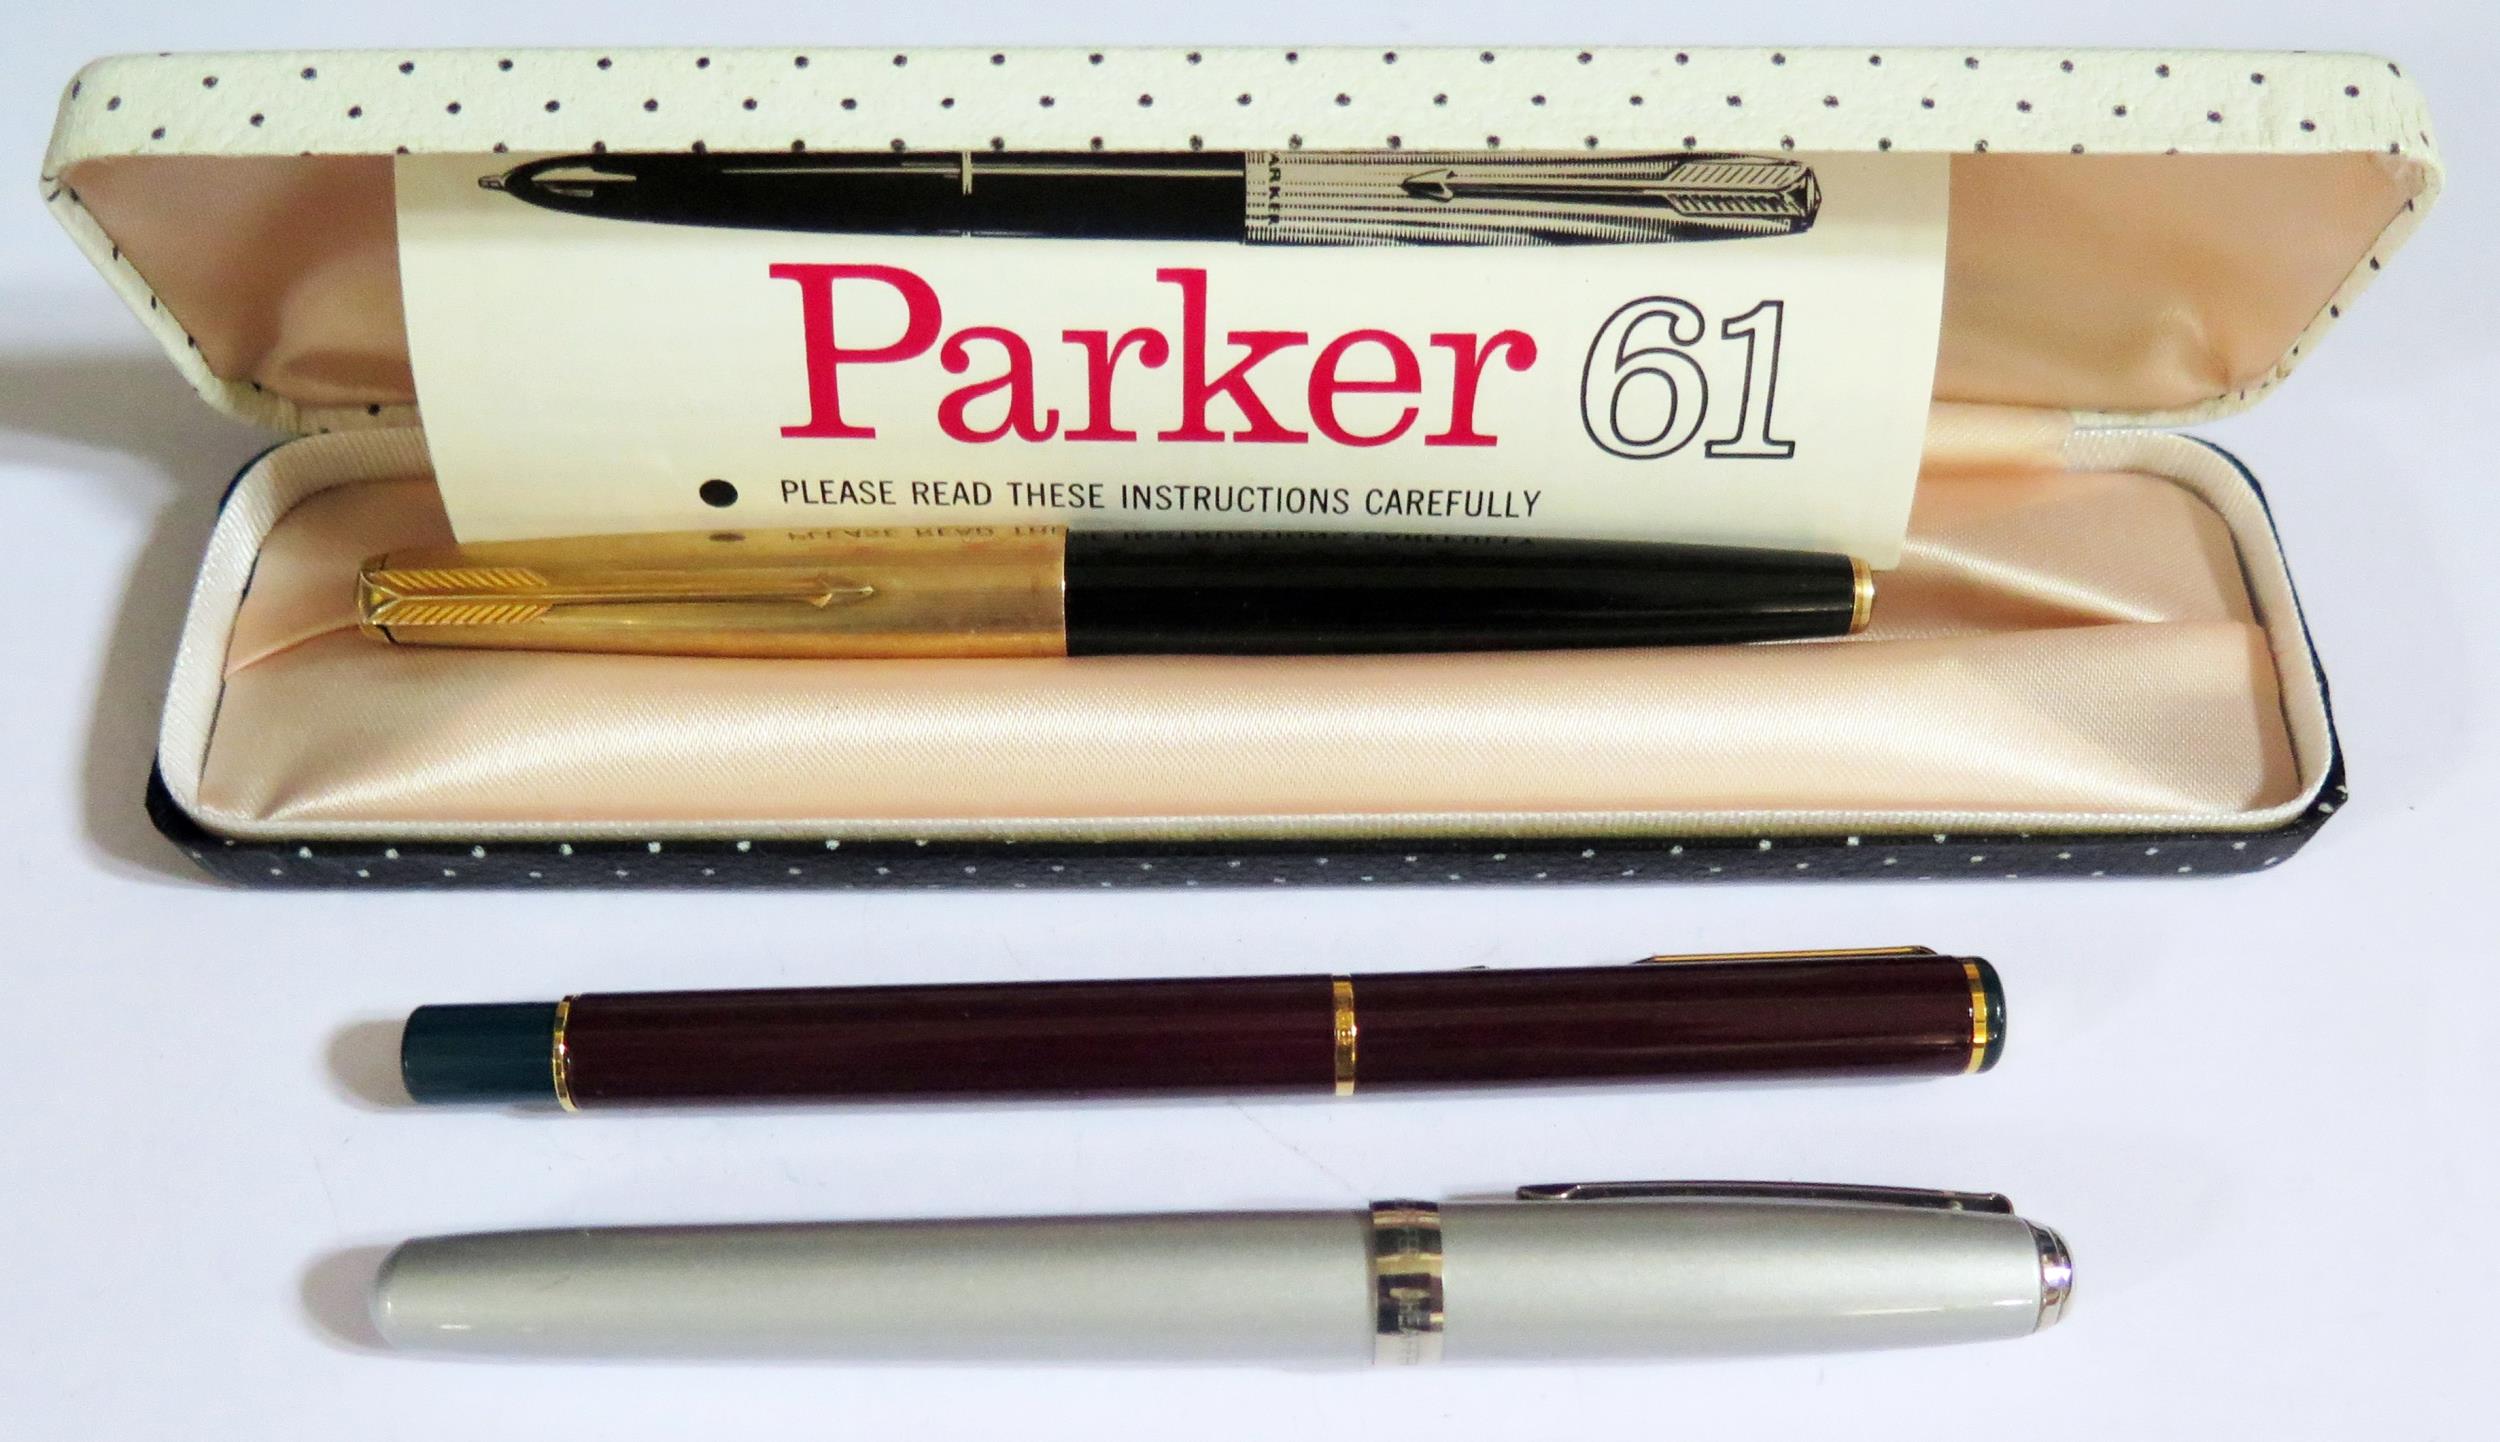 A Parker 61 Cased Fountain Pen with instructions, modern Parker and Sheaffer